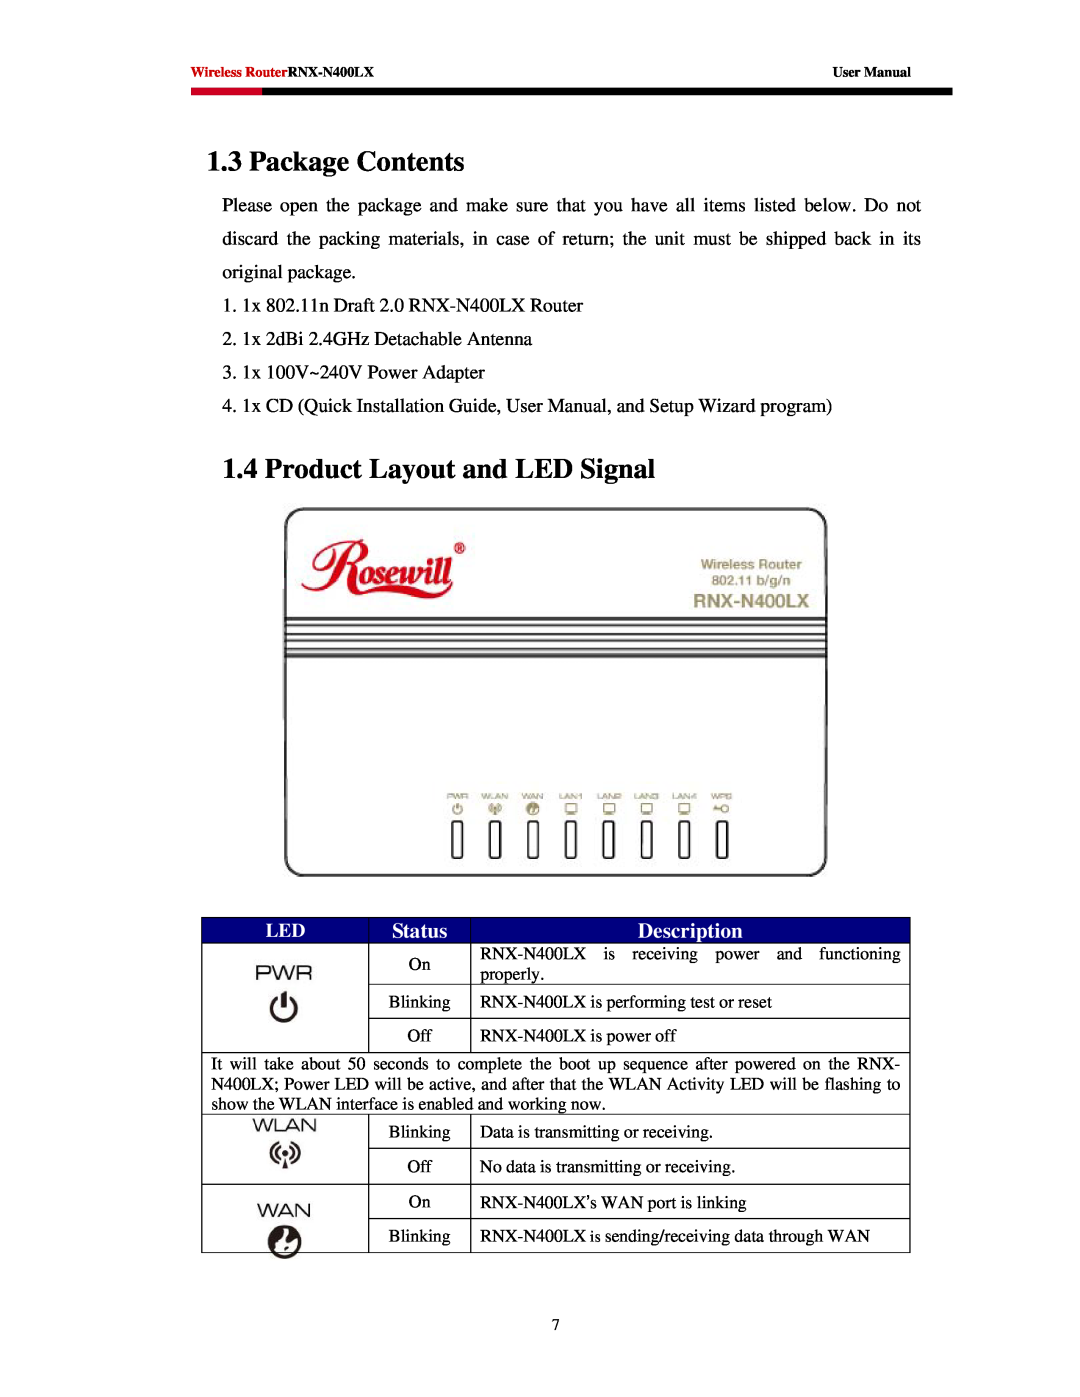 Rosewill RNX-N400LX user manual Package Contents, Product Layout and LED Signal, Status, Description 